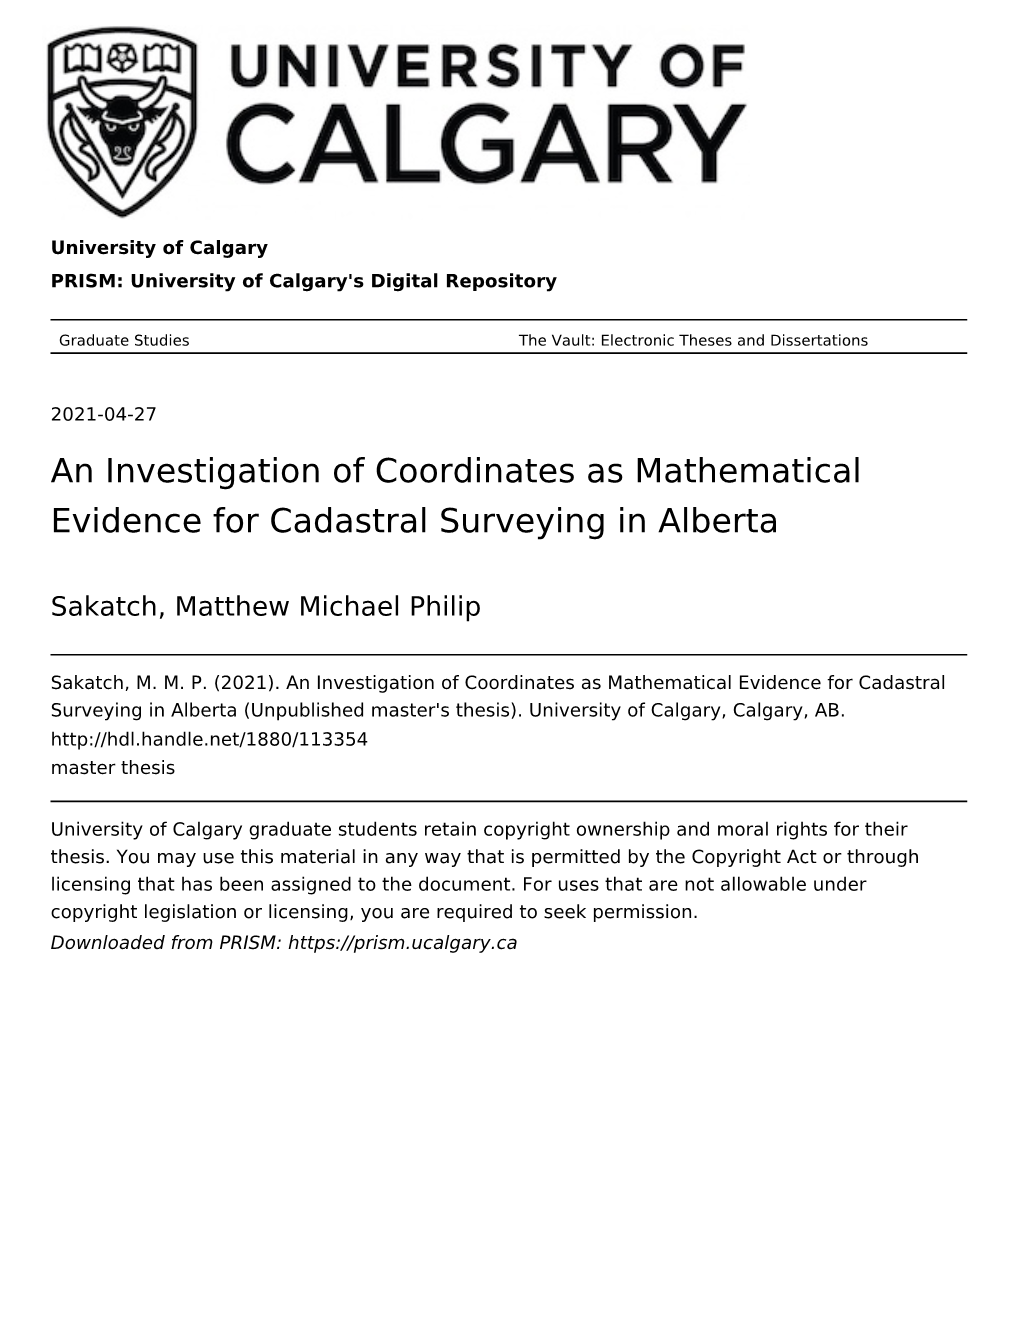 An Investigation of Coordinates As Mathematical Evidence for Cadastral Surveying in Alberta